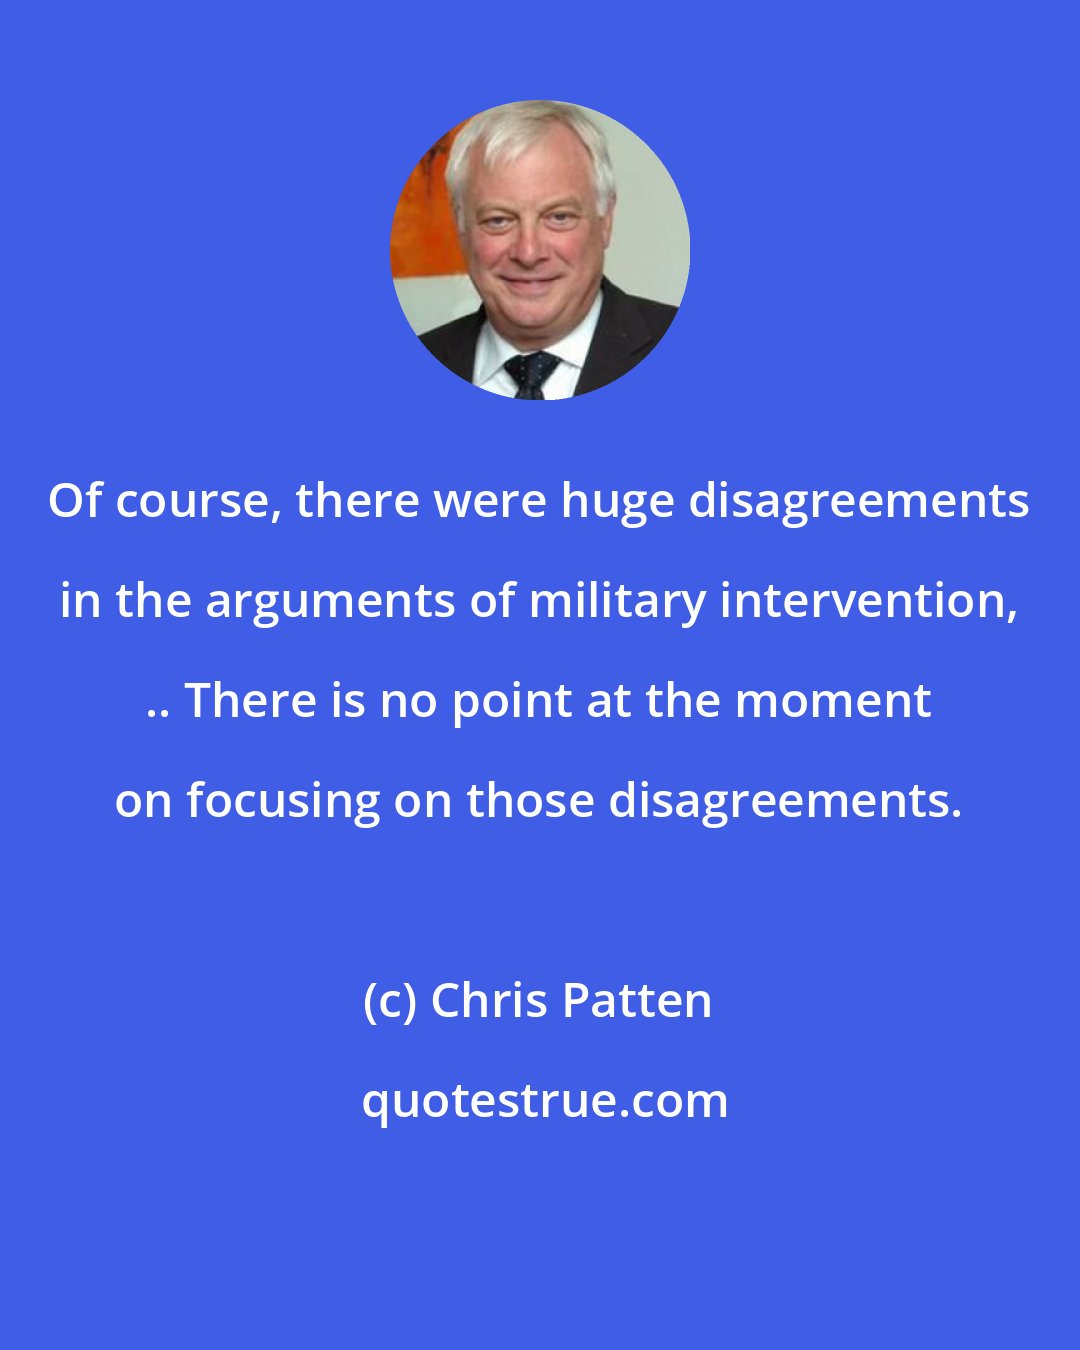 Chris Patten: Of course, there were huge disagreements in the arguments of military intervention, .. There is no point at the moment on focusing on those disagreements.